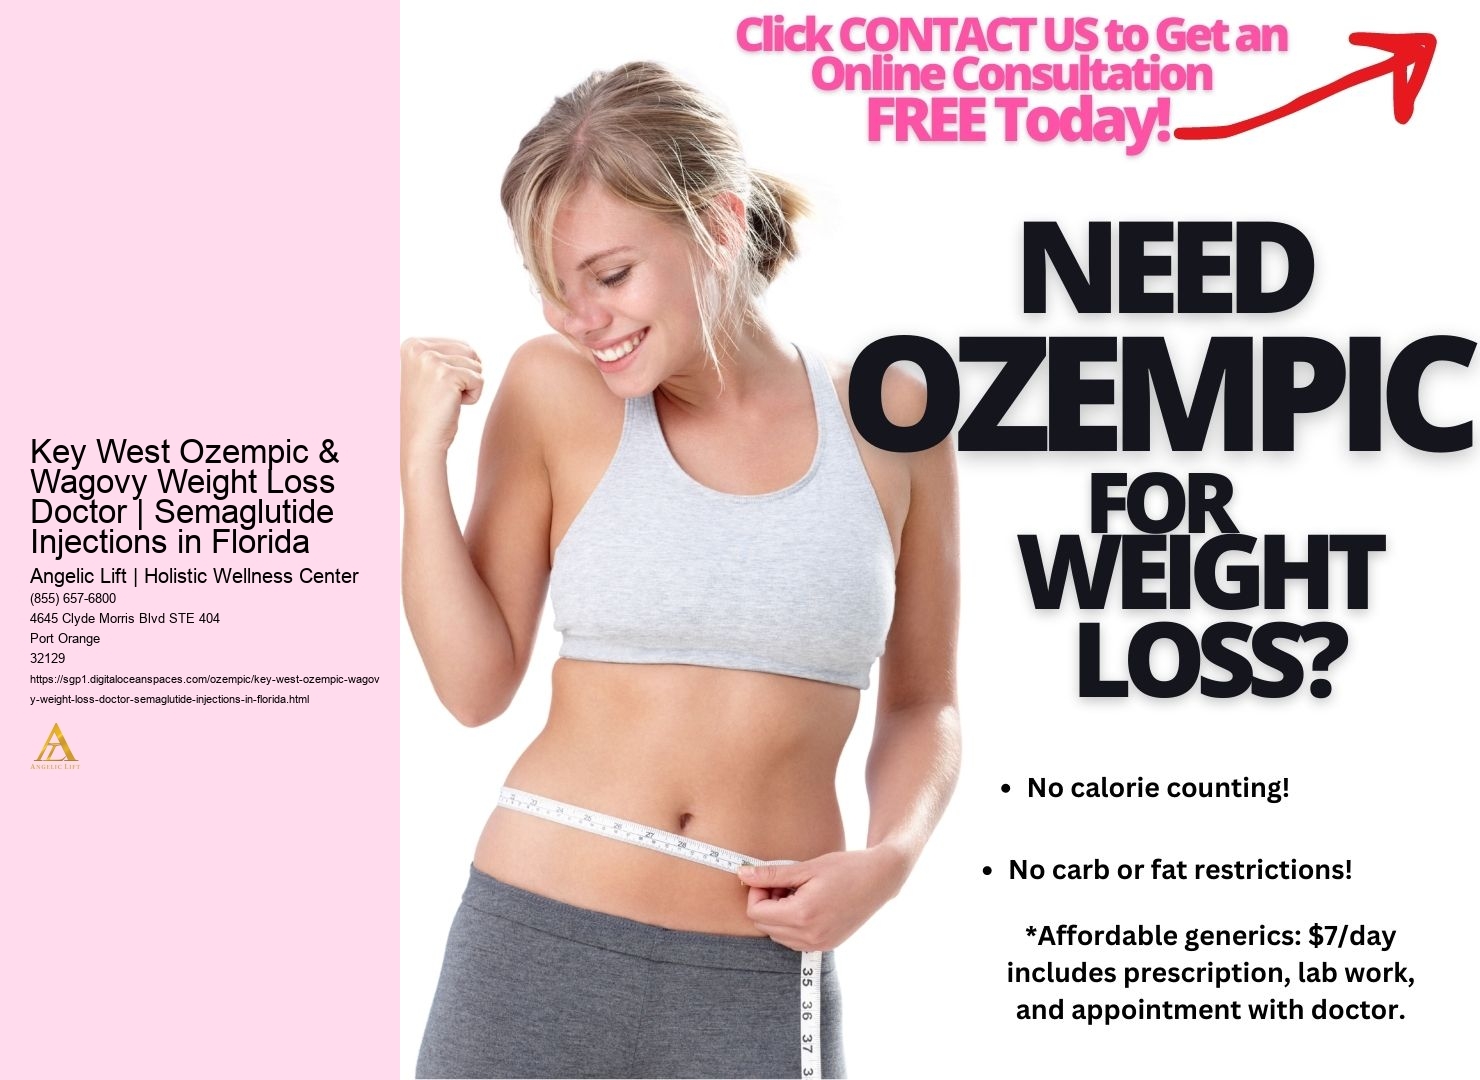 Key West Ozempic & Wagovy Weight Loss Doctor | Semaglutide Injections in Florida